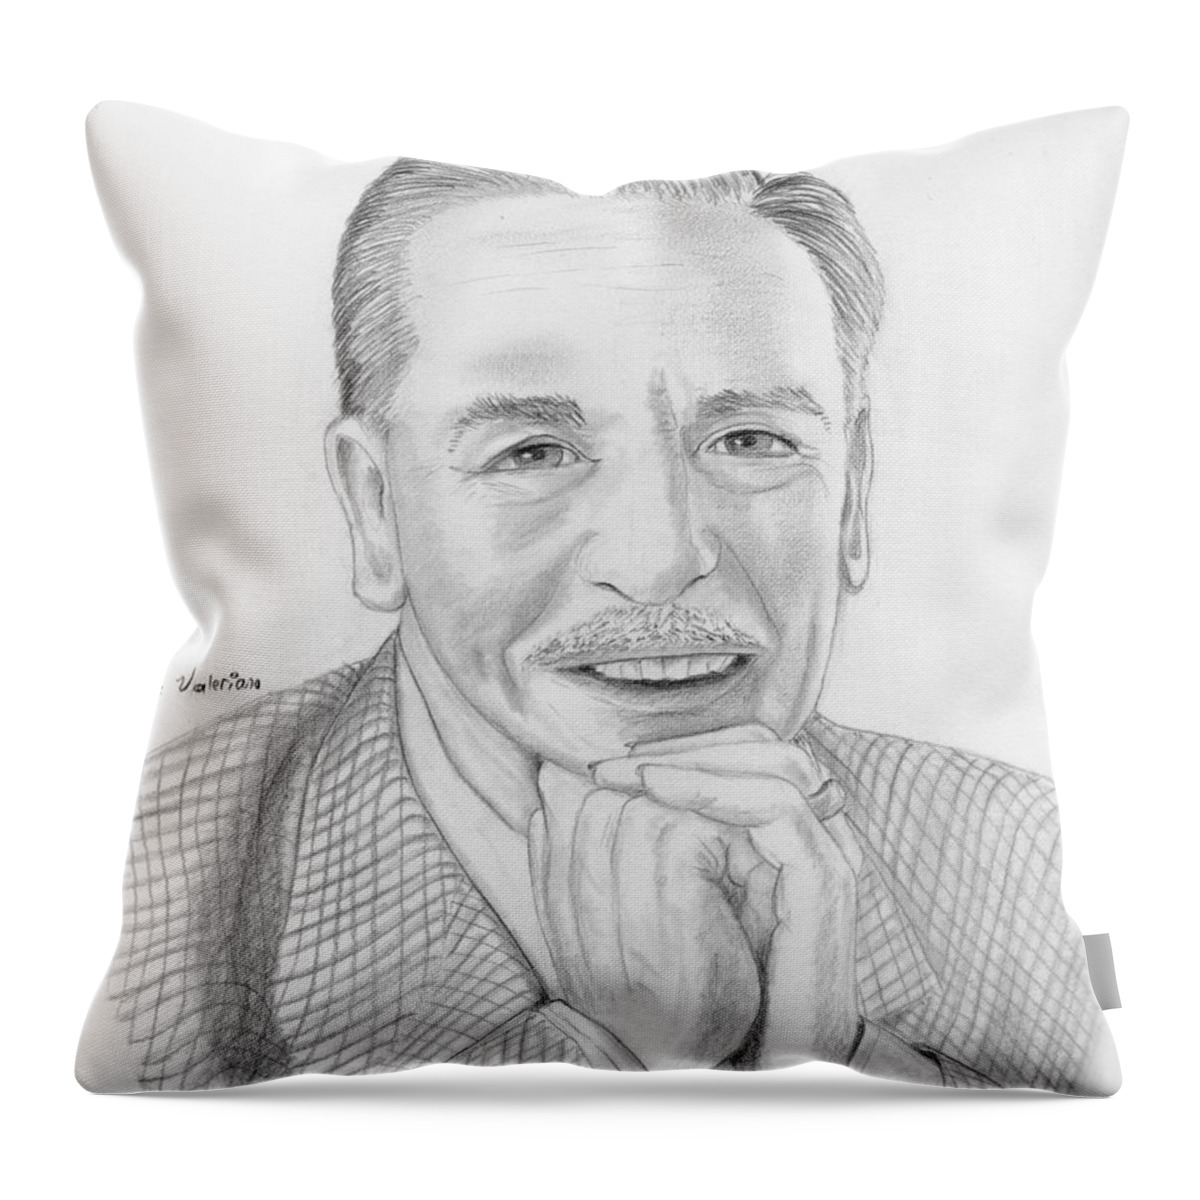 Magic Kingdom Throw Pillow featuring the drawing Walt Disney by Martin Valeriano